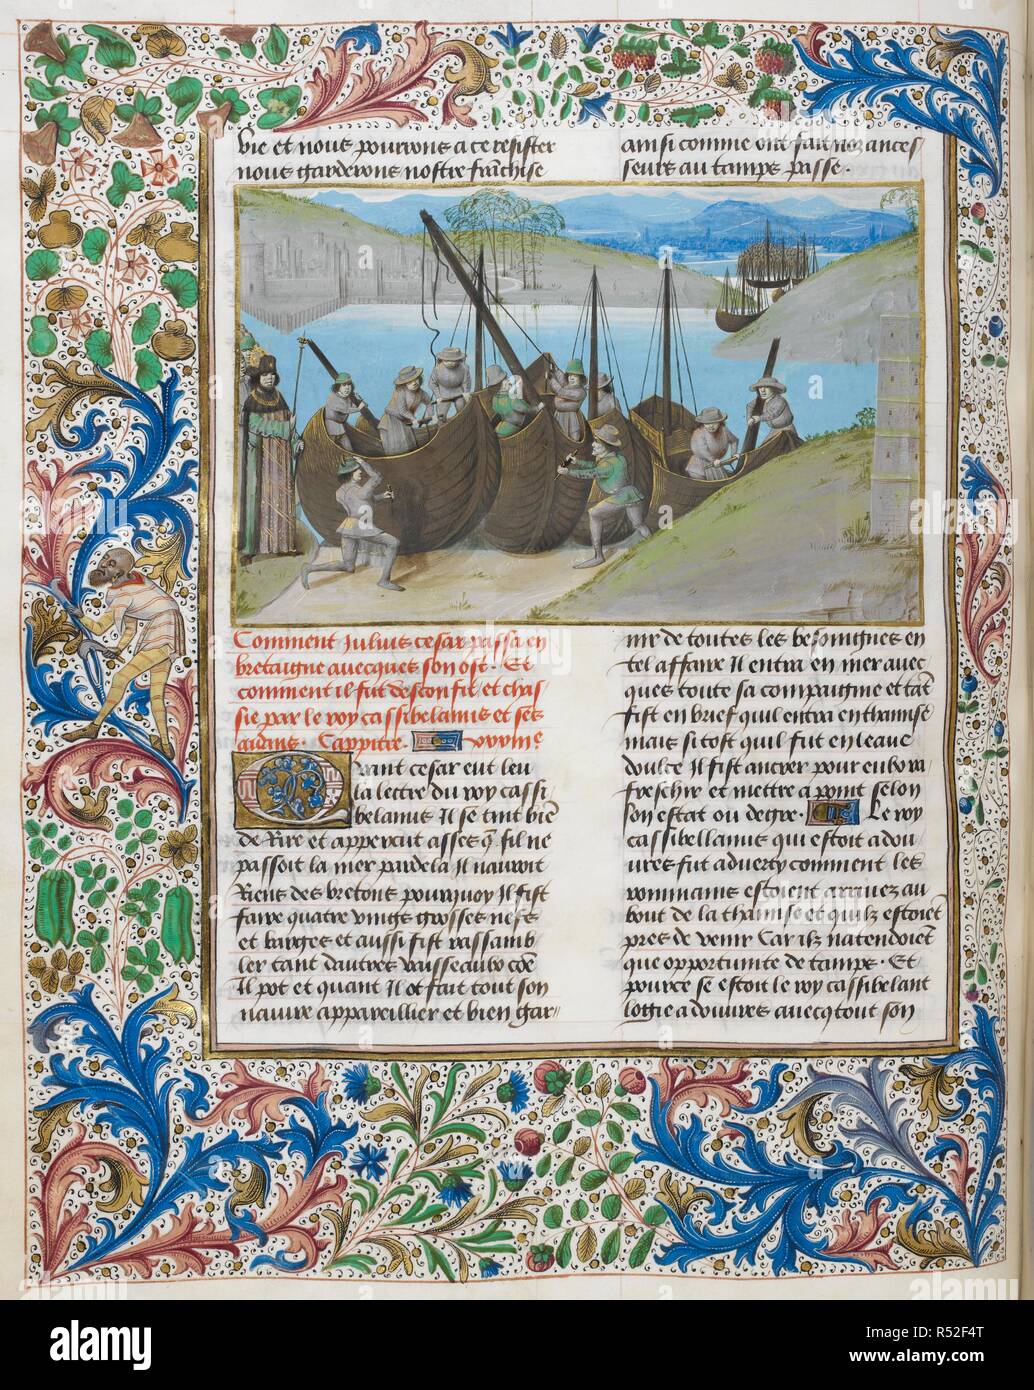 Caesar building a fleet to invade Britain. . Chroniques d'Angleterre. Netherlands, S. (Bruges); after 1471, before 1483. Each miniature marked by the same letter of the alphabet as the first page of a quire in which it is situated. Initials in gold on blue and rose grounds with penwork decoration on white. Line-fillers in blue and rose with penwork decoration in white. Full foliate border. Source: Royal 15 E. IV, f.57v. Author: Master of the London Wavrin. Stock Photo